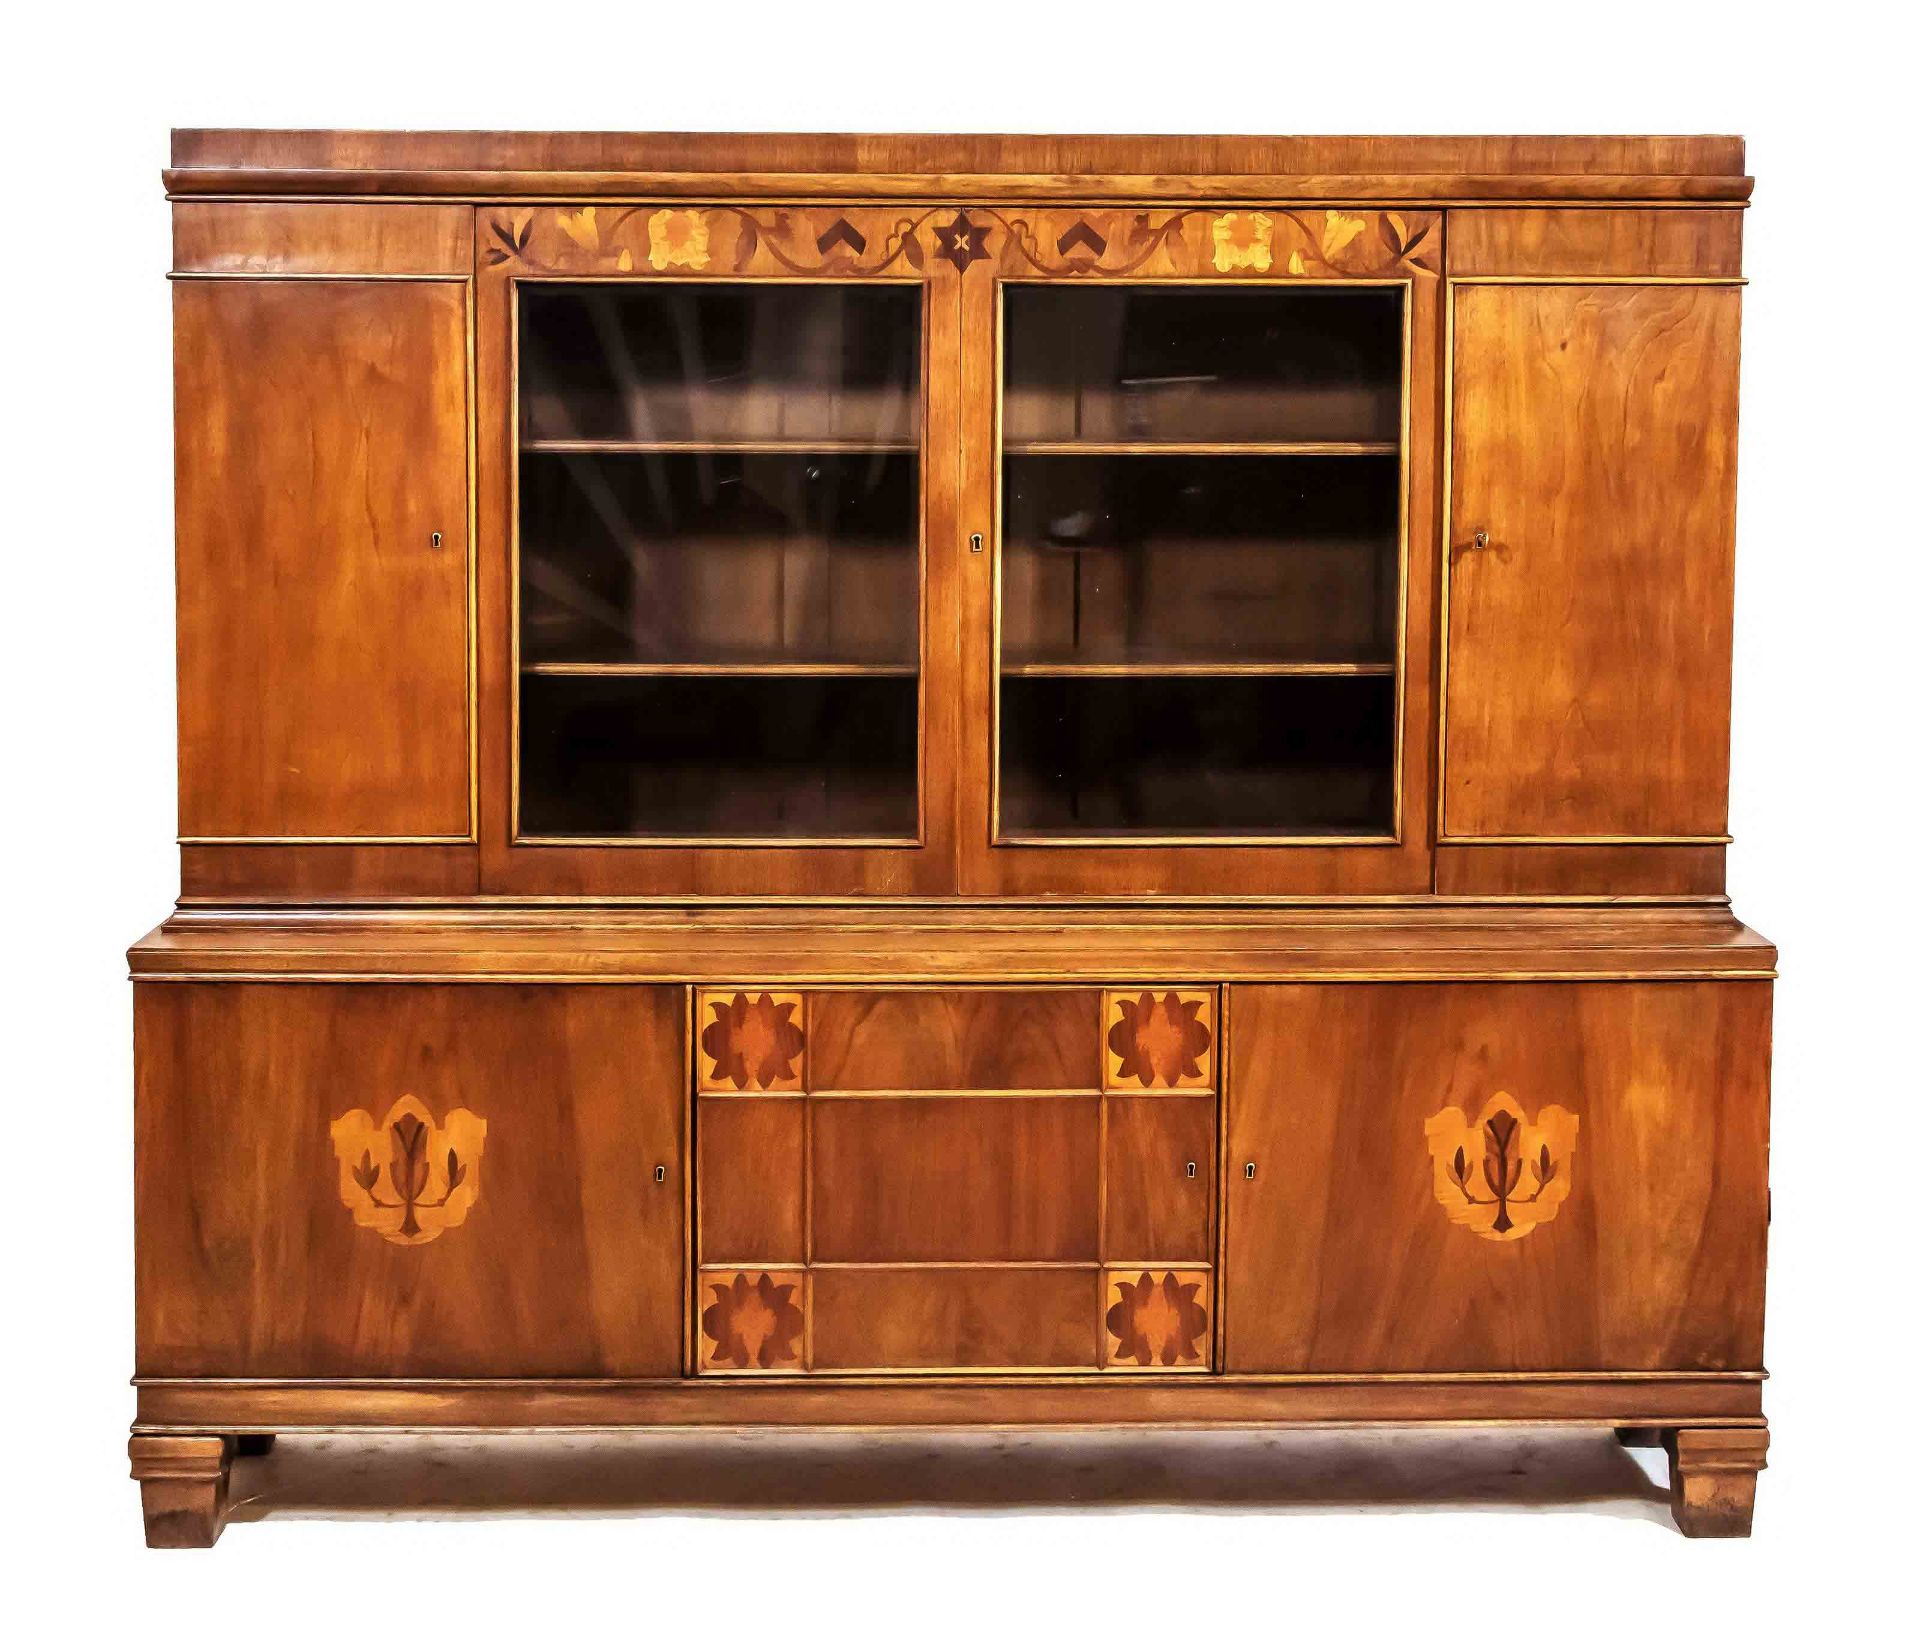 Art deco bookcase around 1920, walnut veneer, 176 x 201 x 49 cm.- The furniture can not be viewed in